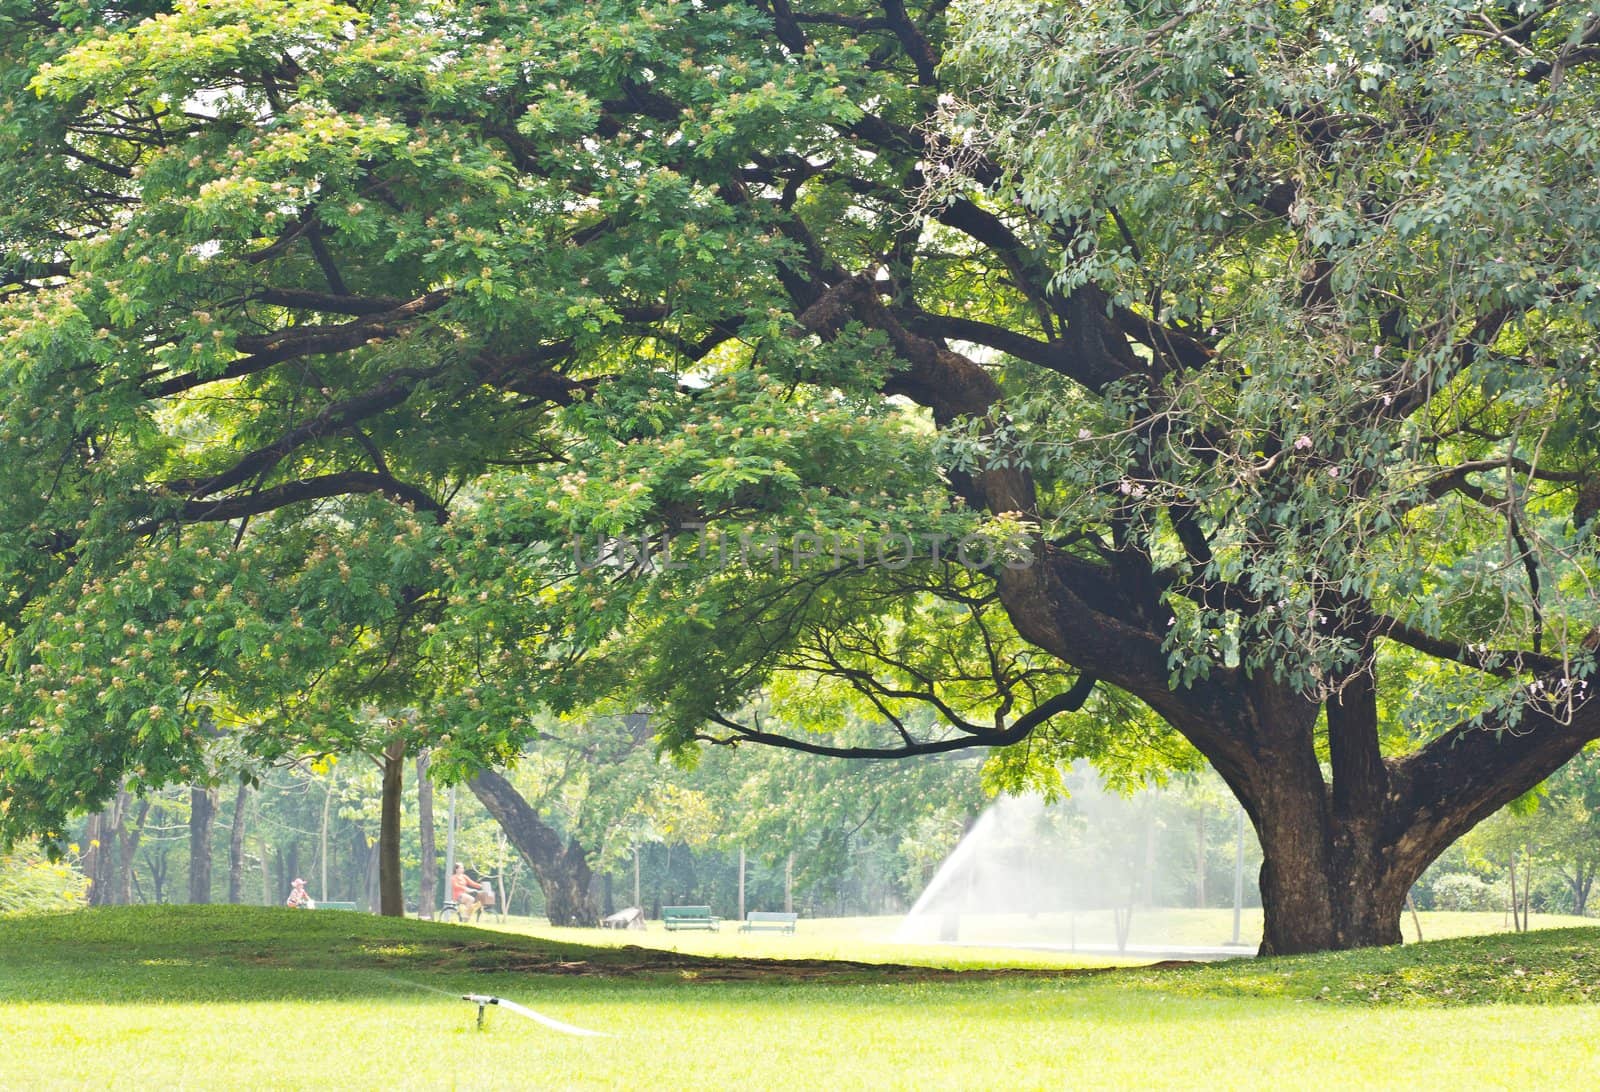 Tree in the park